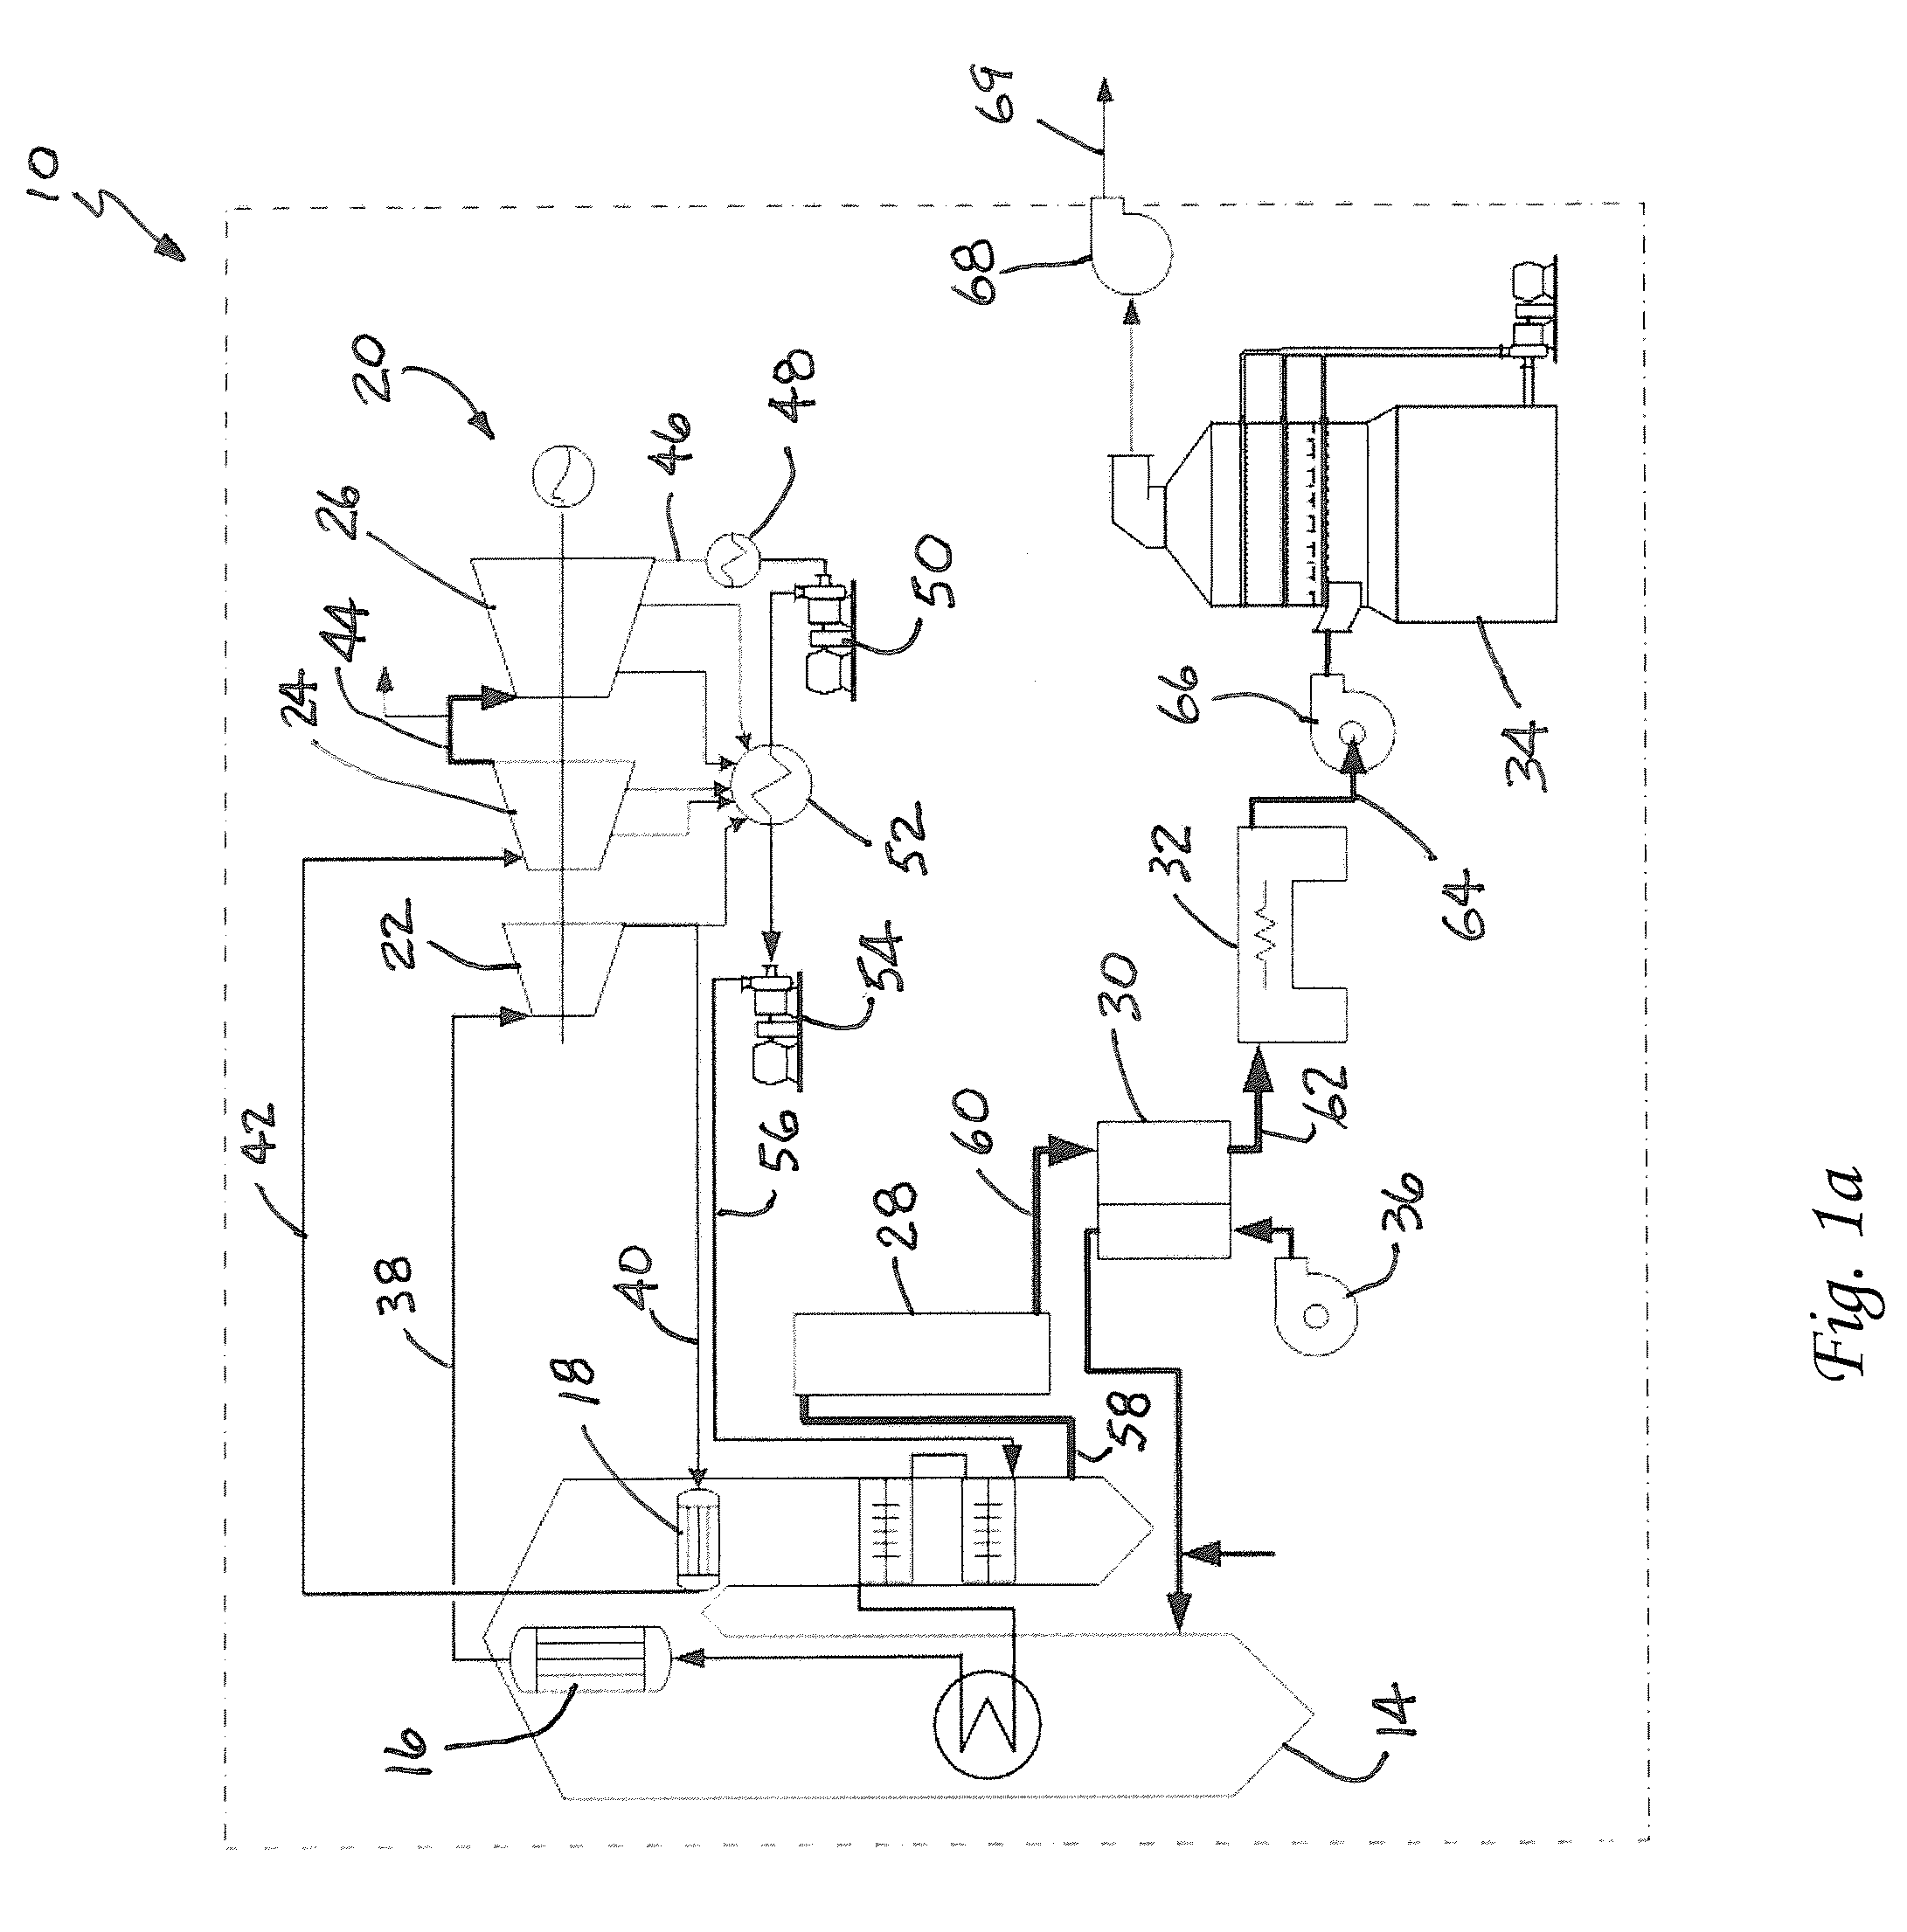 Method for removing CO2 from coal-fired power plant flue gas using ammonia as the scrubbing solution, with a chemical additive for reducing NH3 losses, coupled with a membrane for concentrating the CO2 stream to the gas stripper